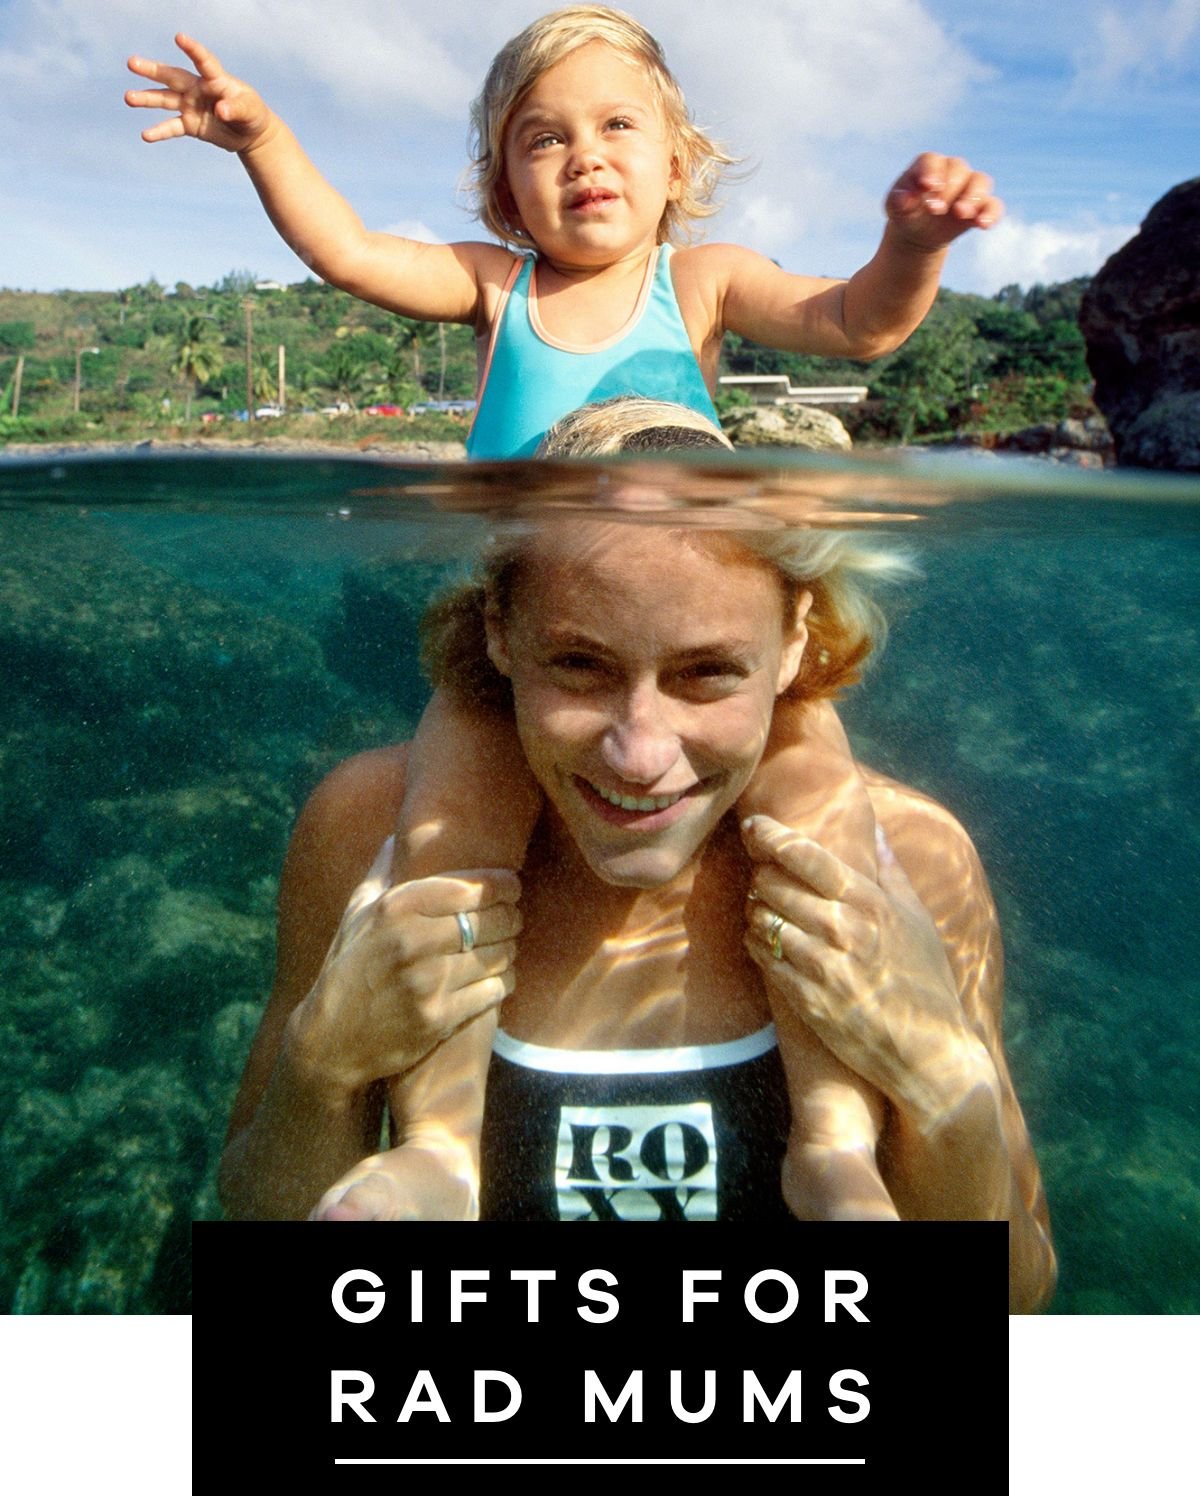 Gifts For Rad Mums Underwater Image